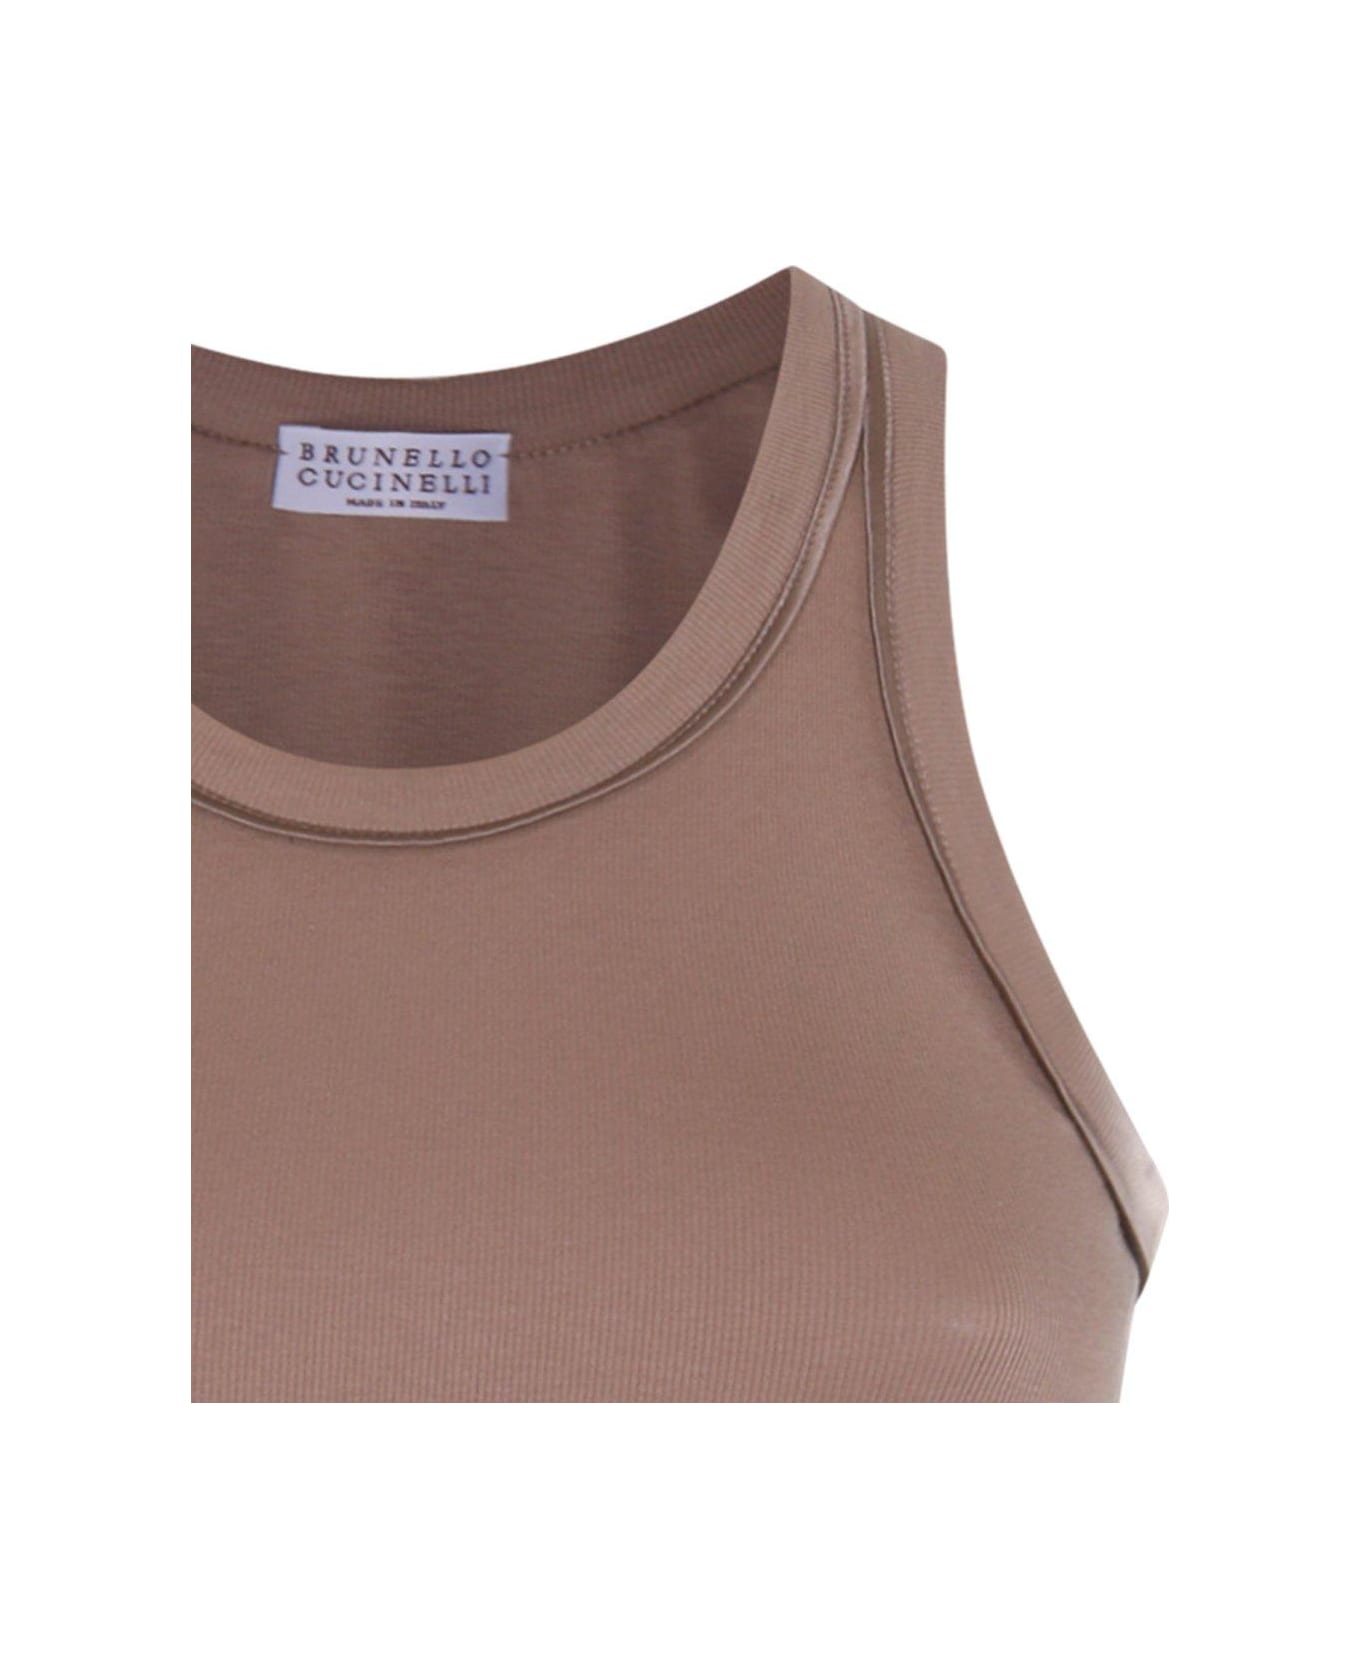 Brunello Cucinelli Stretched Ribbed Jersey Top - Coyote タンクトップ